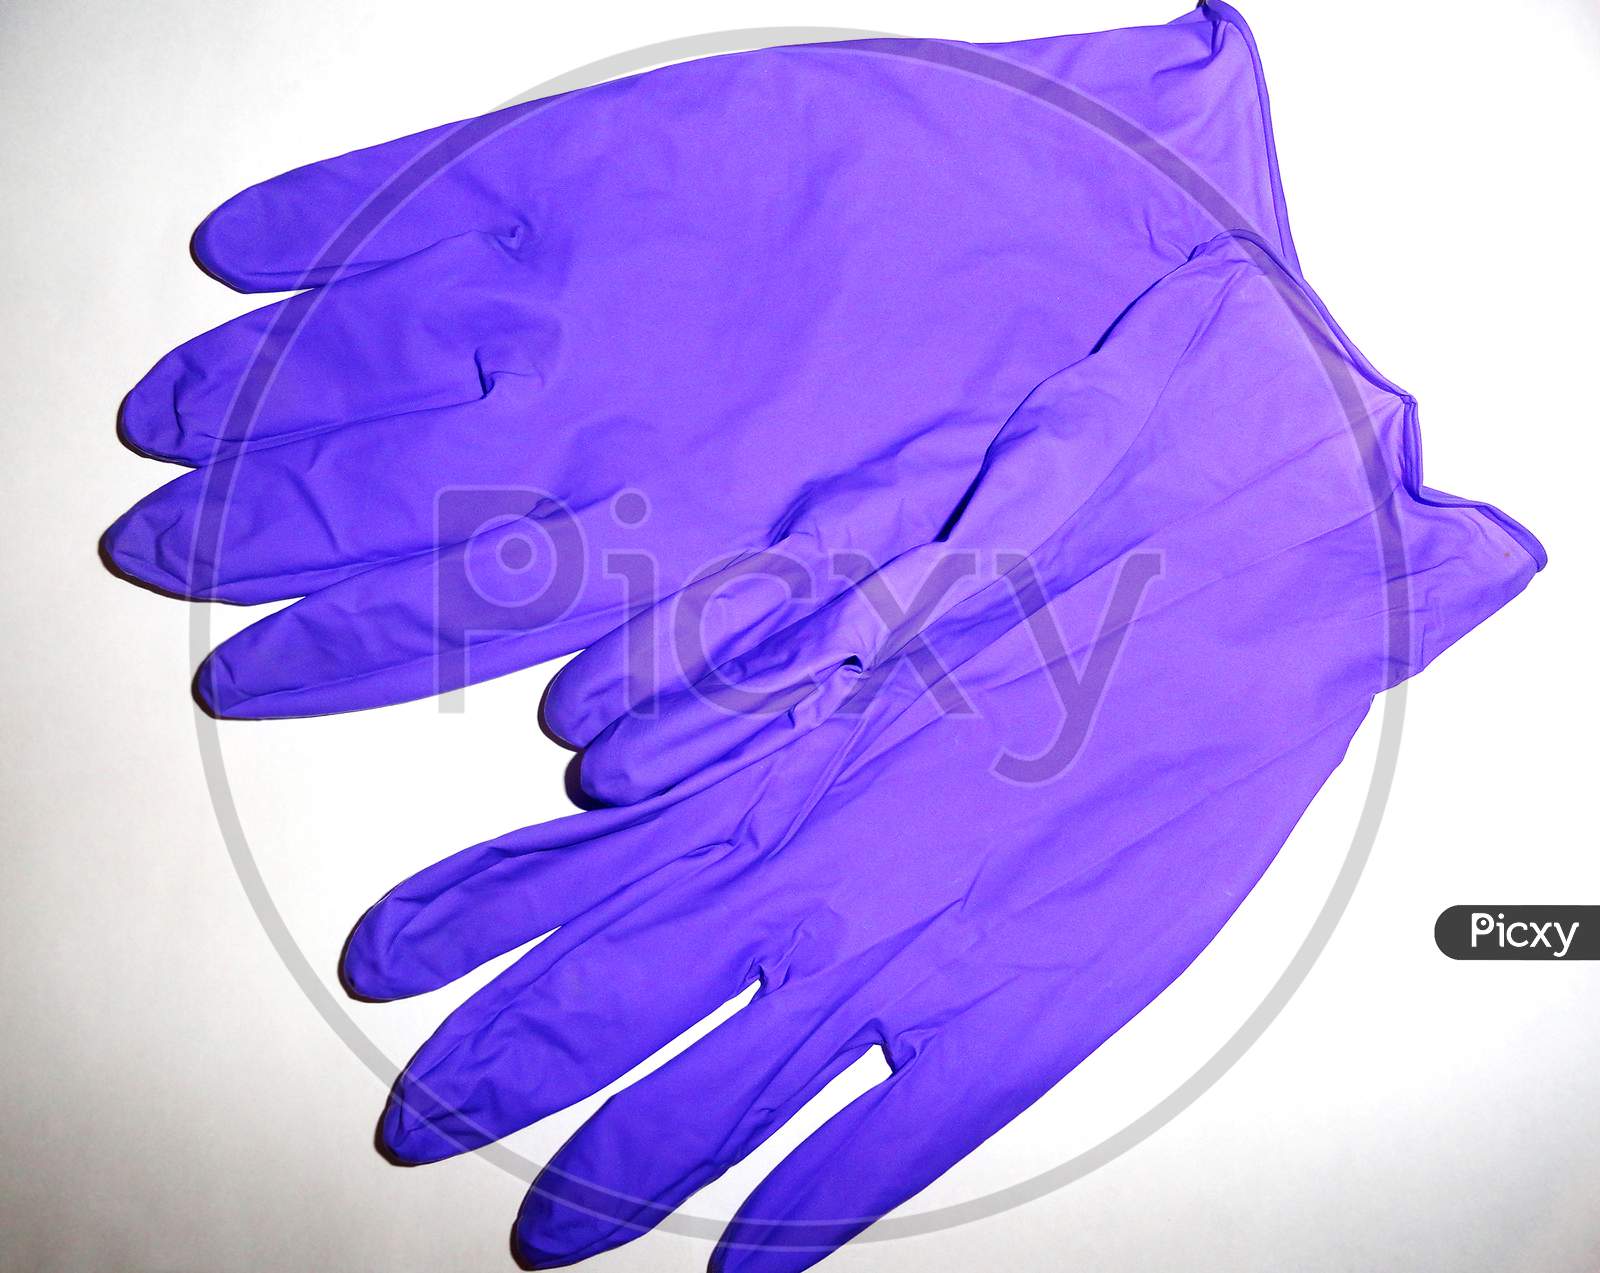 Purple color surgical gloves on white background